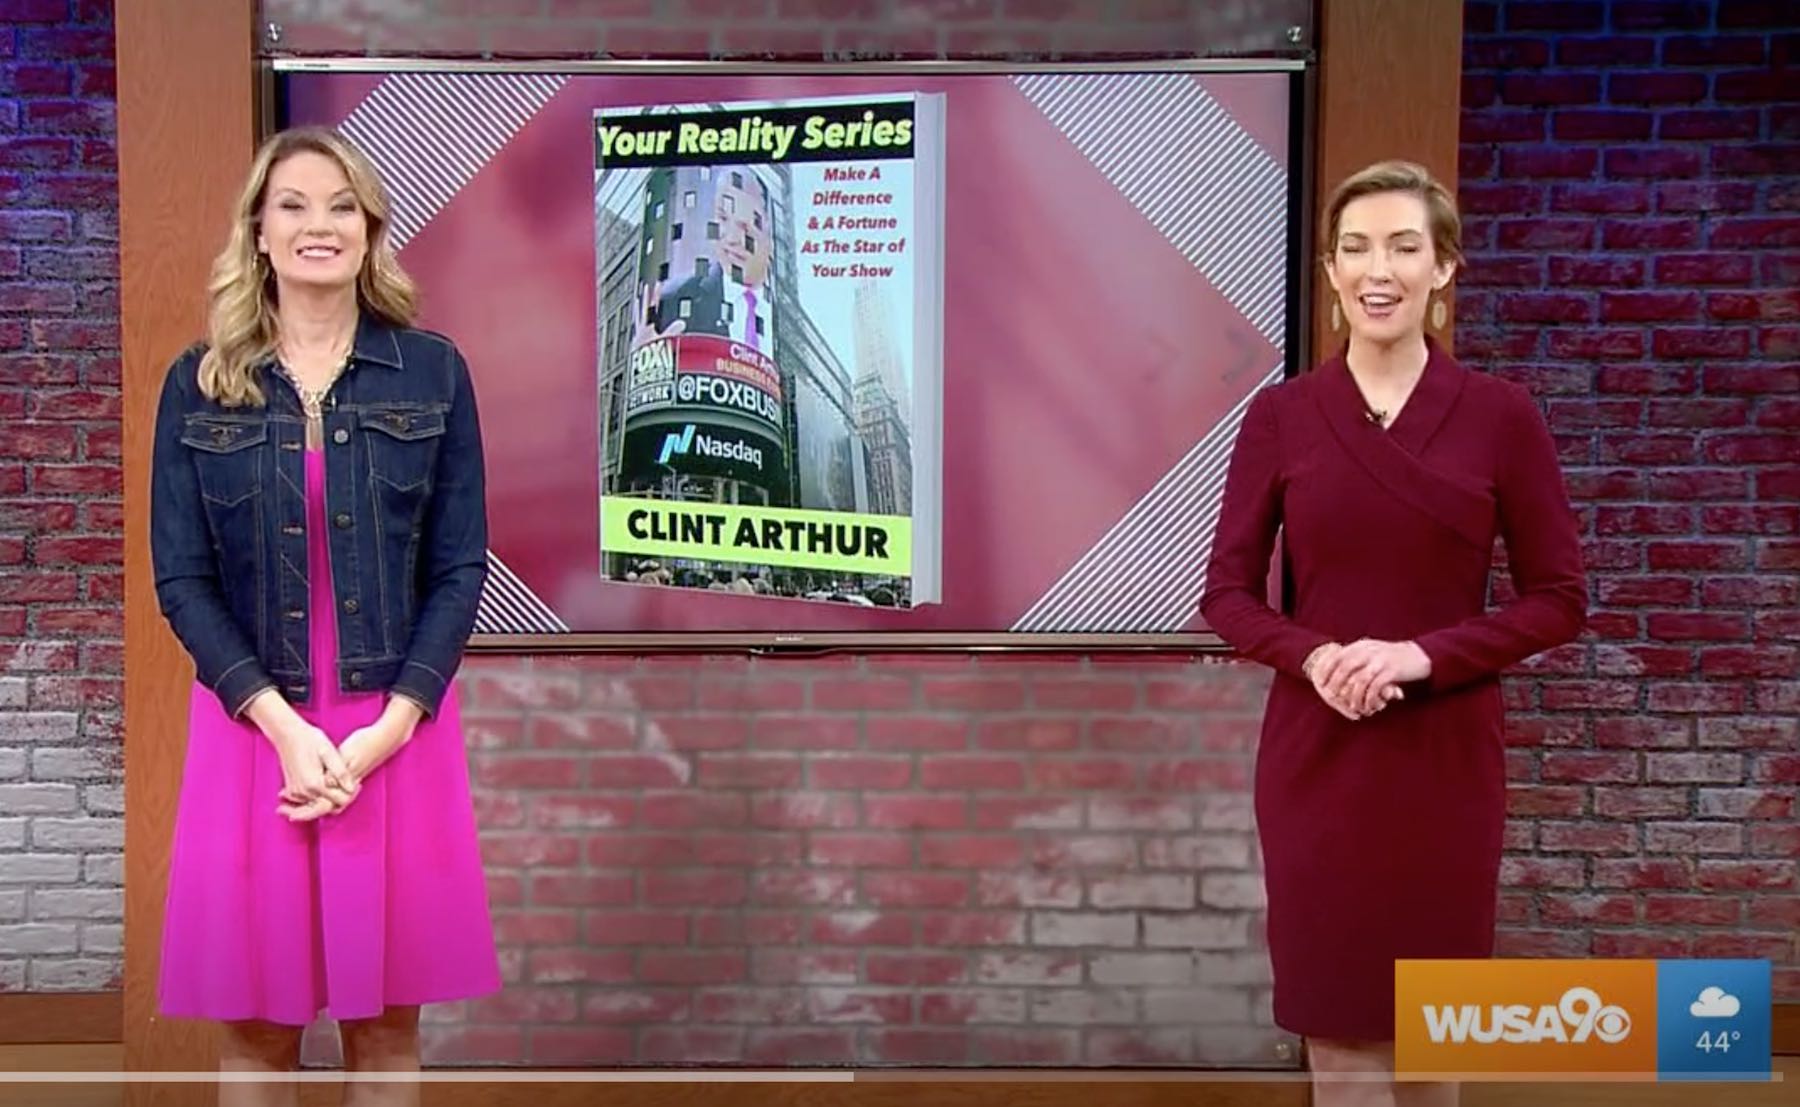 Clint Arthur promotes his new book YOUR REALITY SERIES on CBS TV Washington DC